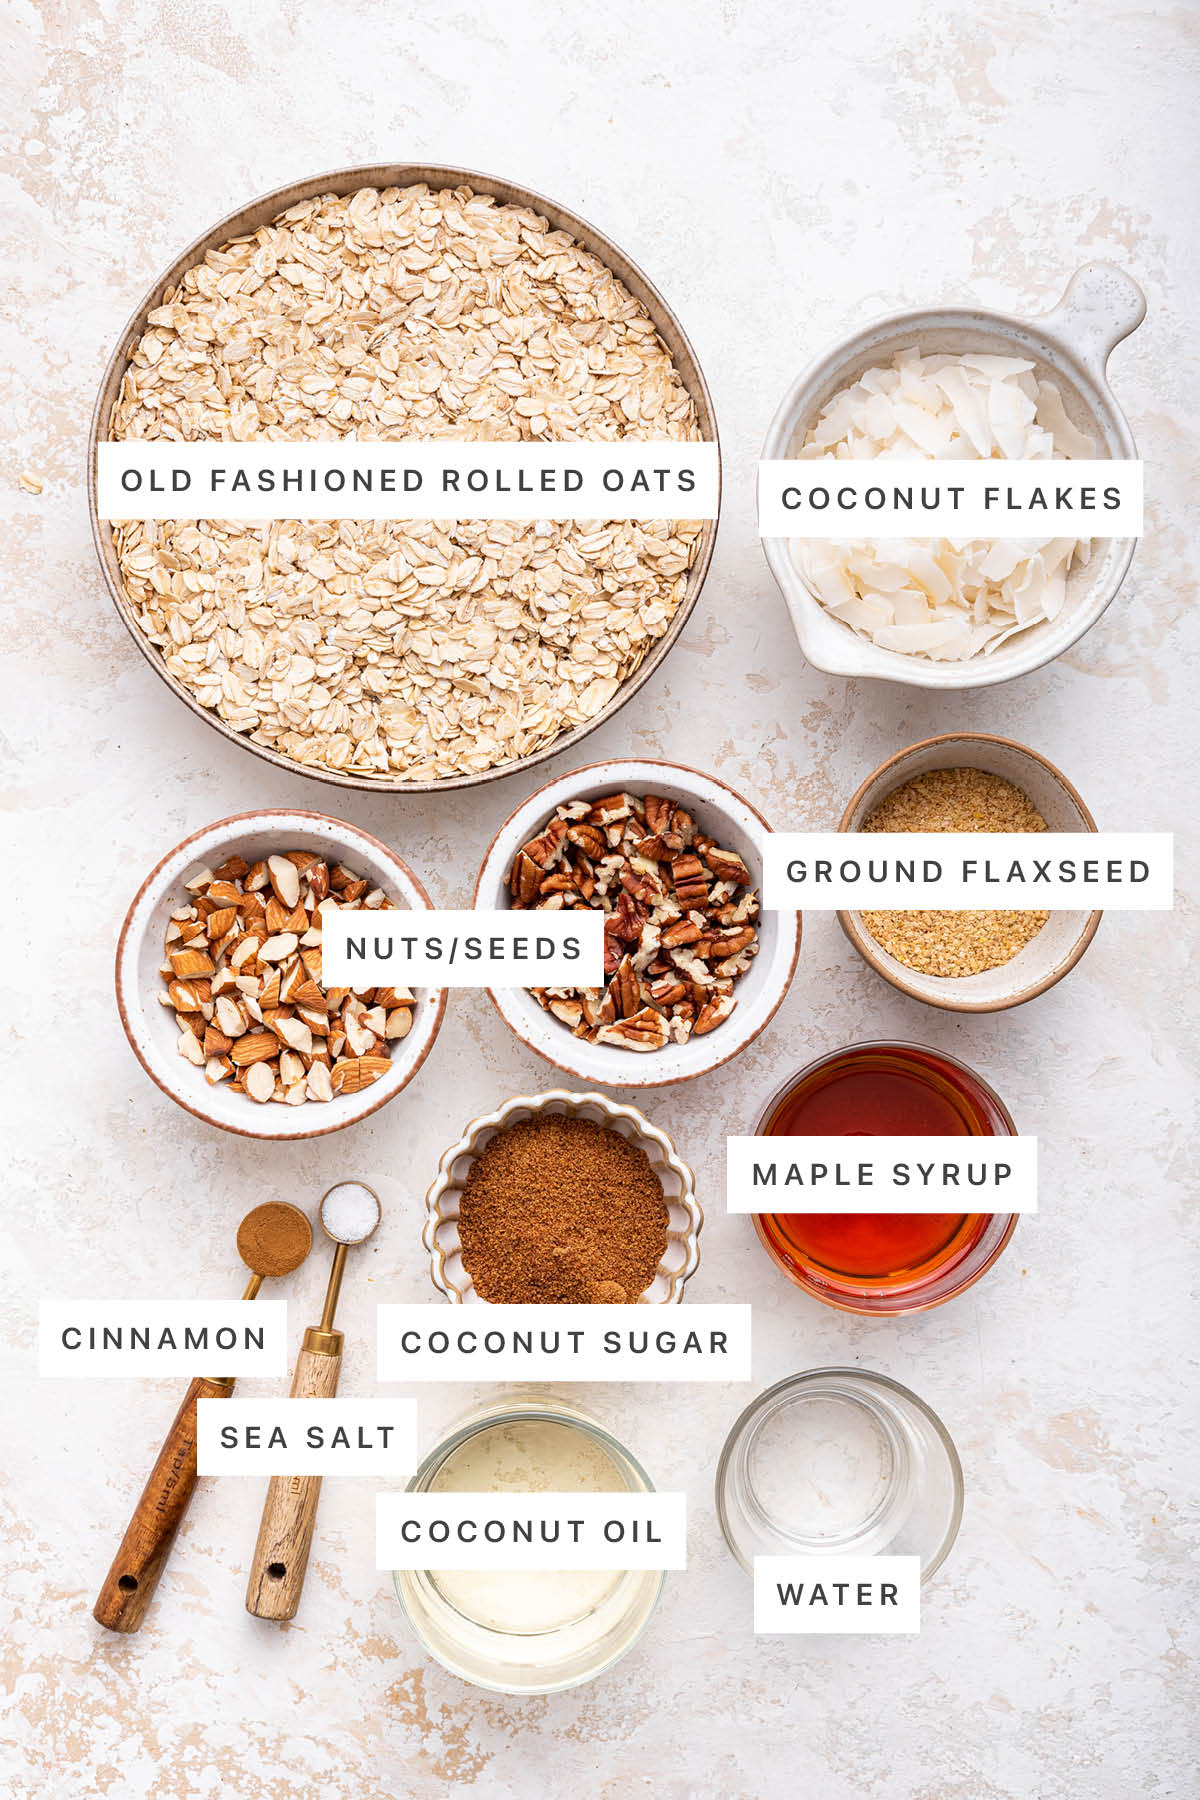 Ingredients measured out to make Homemade Granola: oats, coconut flakes, nuts, ground flaxseed, maple syrup, coconut sugar, cinnamon, sea salt, coconut oil and water.